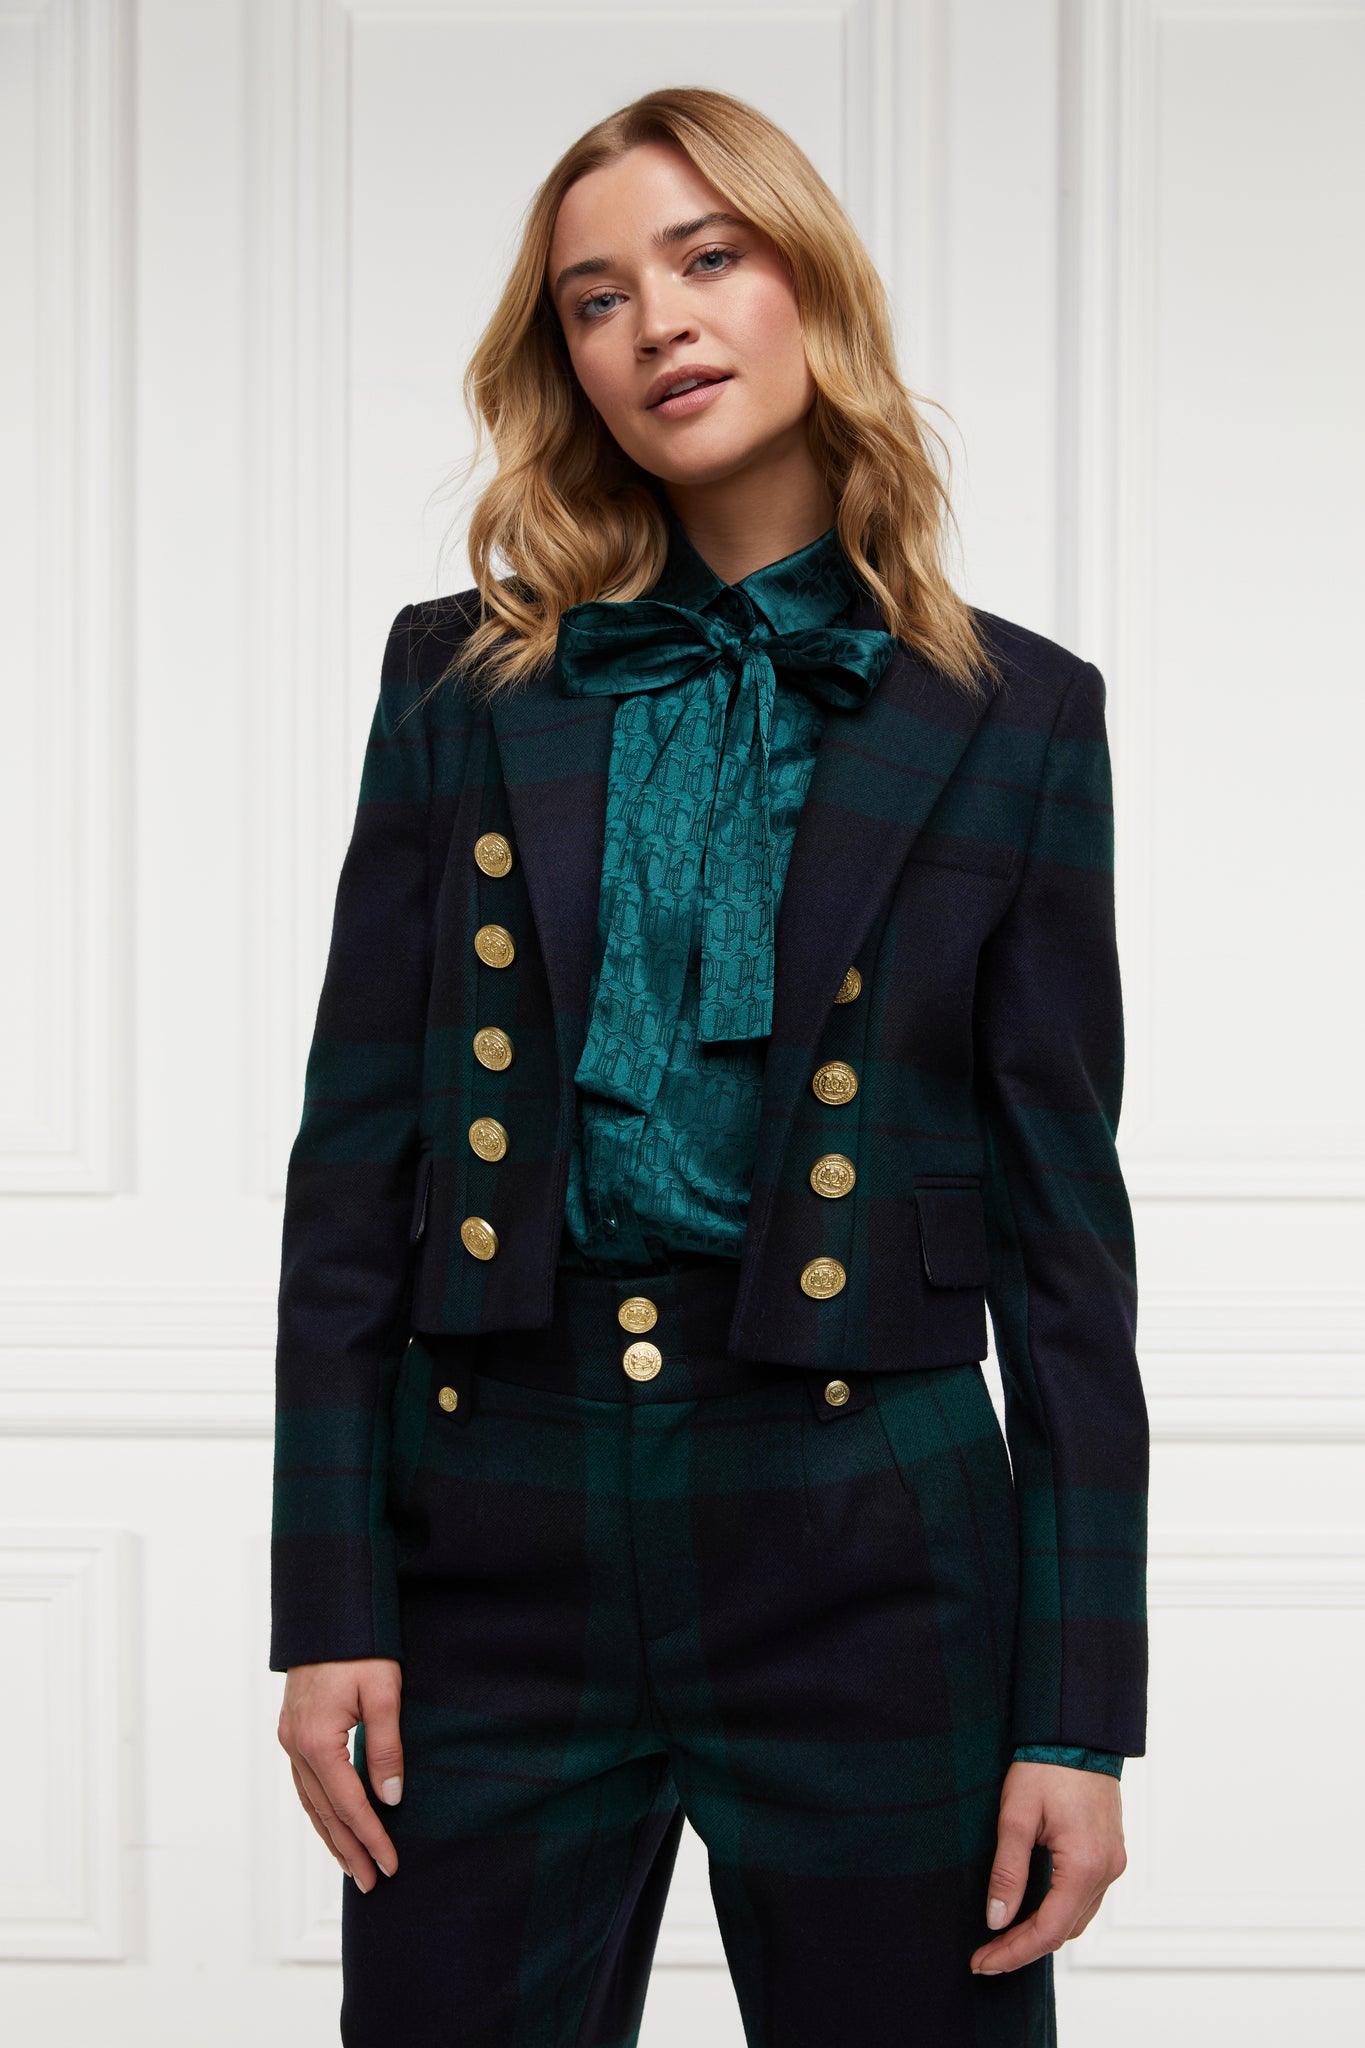 British made tailored cropped jacket in navy and green blackwatch tarten with welt pockets and gold button detail down the front and on sleeves